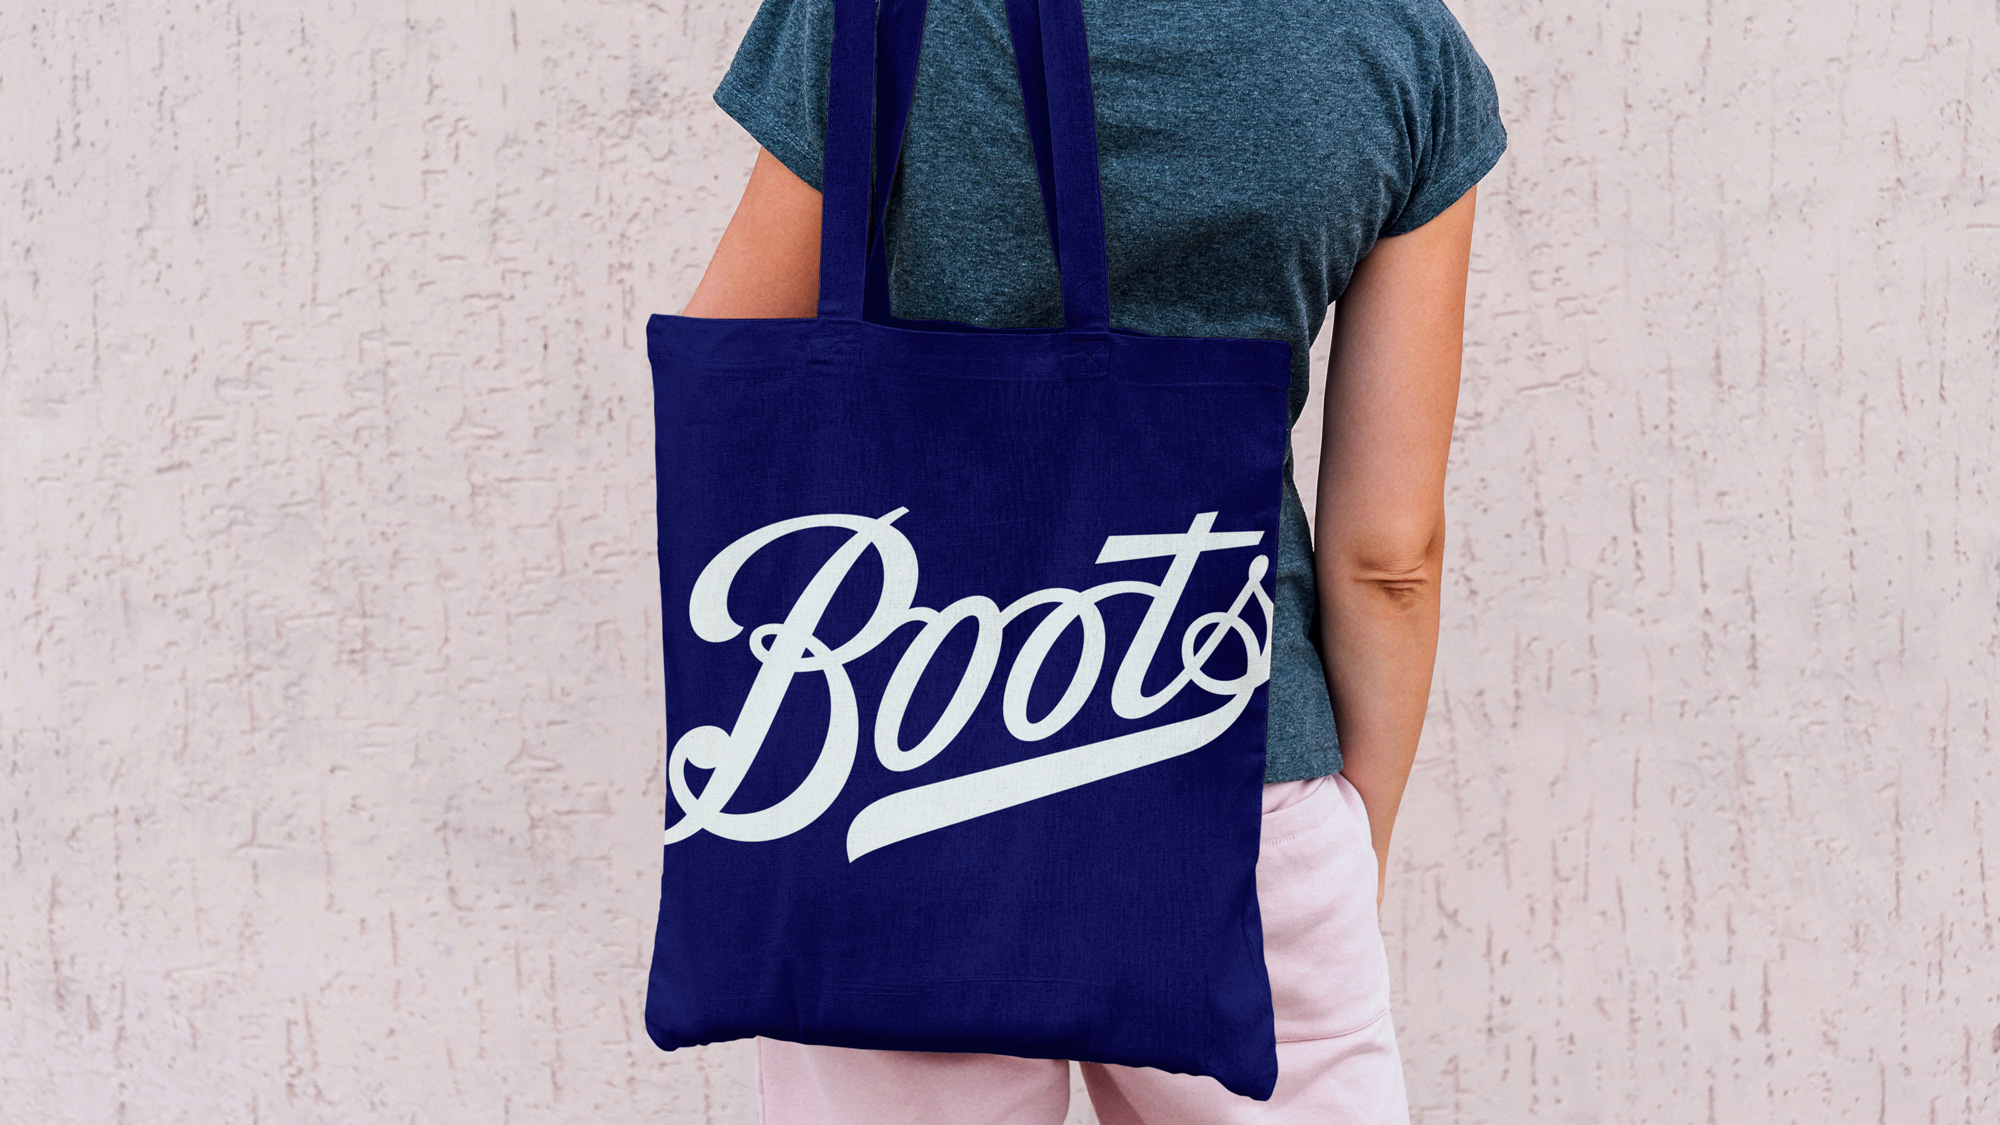 New Logo and Identity for Boots UK by Coley Porter Bell